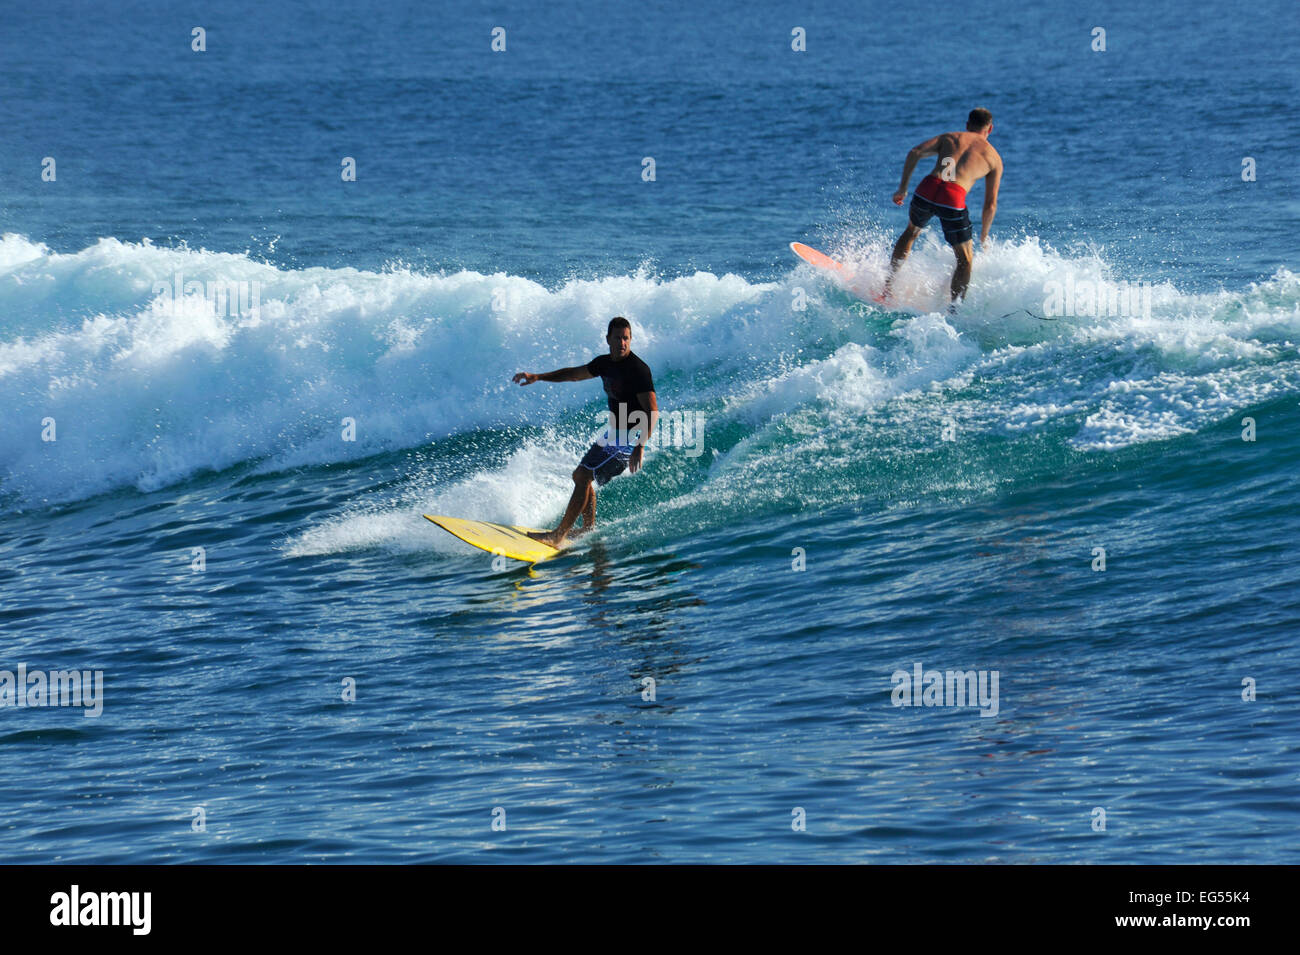 Two adult male surfers riding wave during excellent weather conditions in bay of Durban, KwaZulu-Natal, South Africa Stock Photo